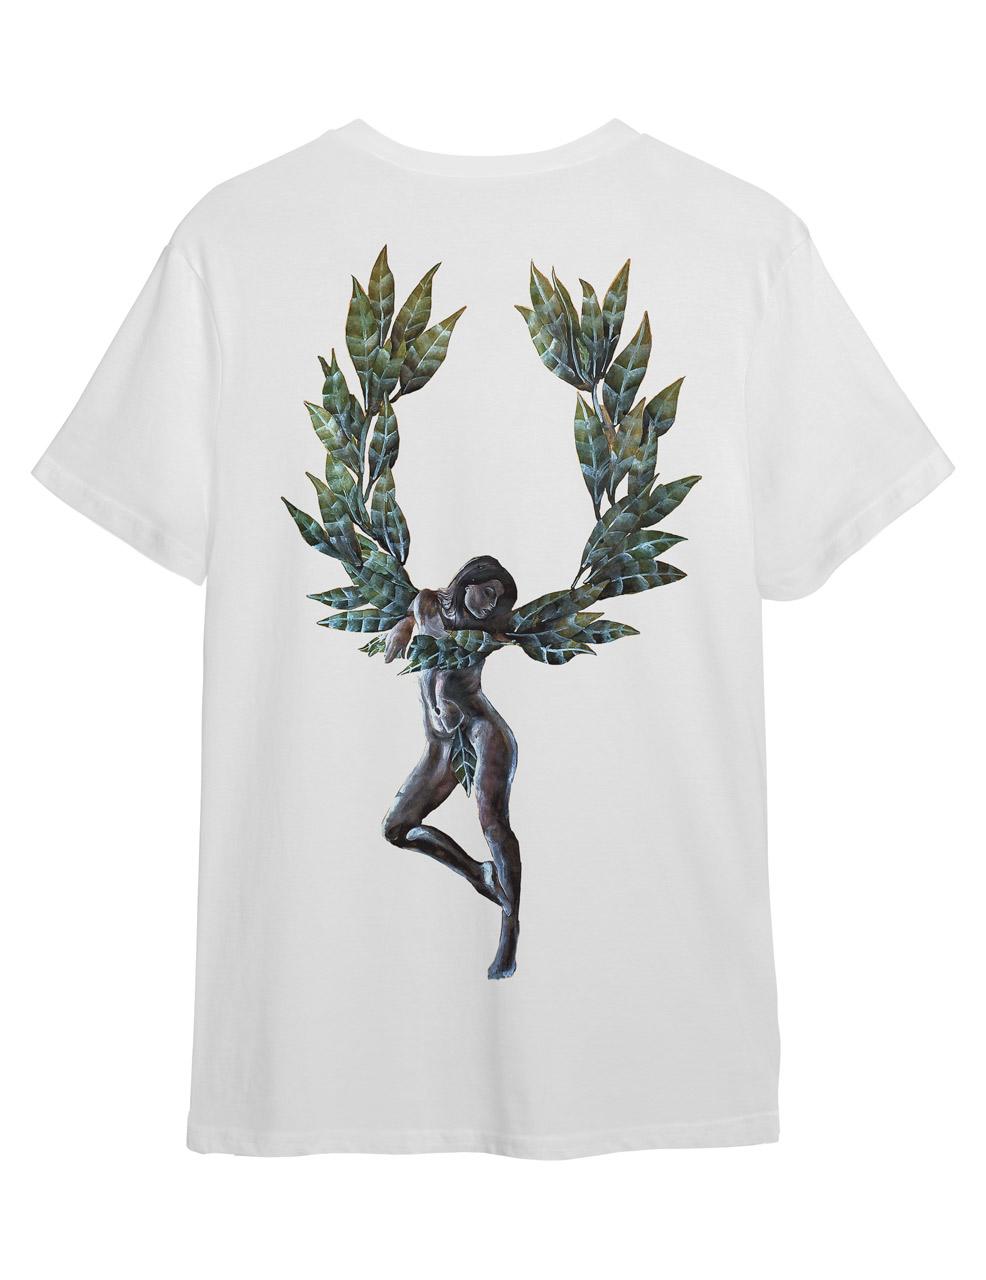 White T-shirt with hand-painted artwork of a women with a laurel wreath for wings on the back